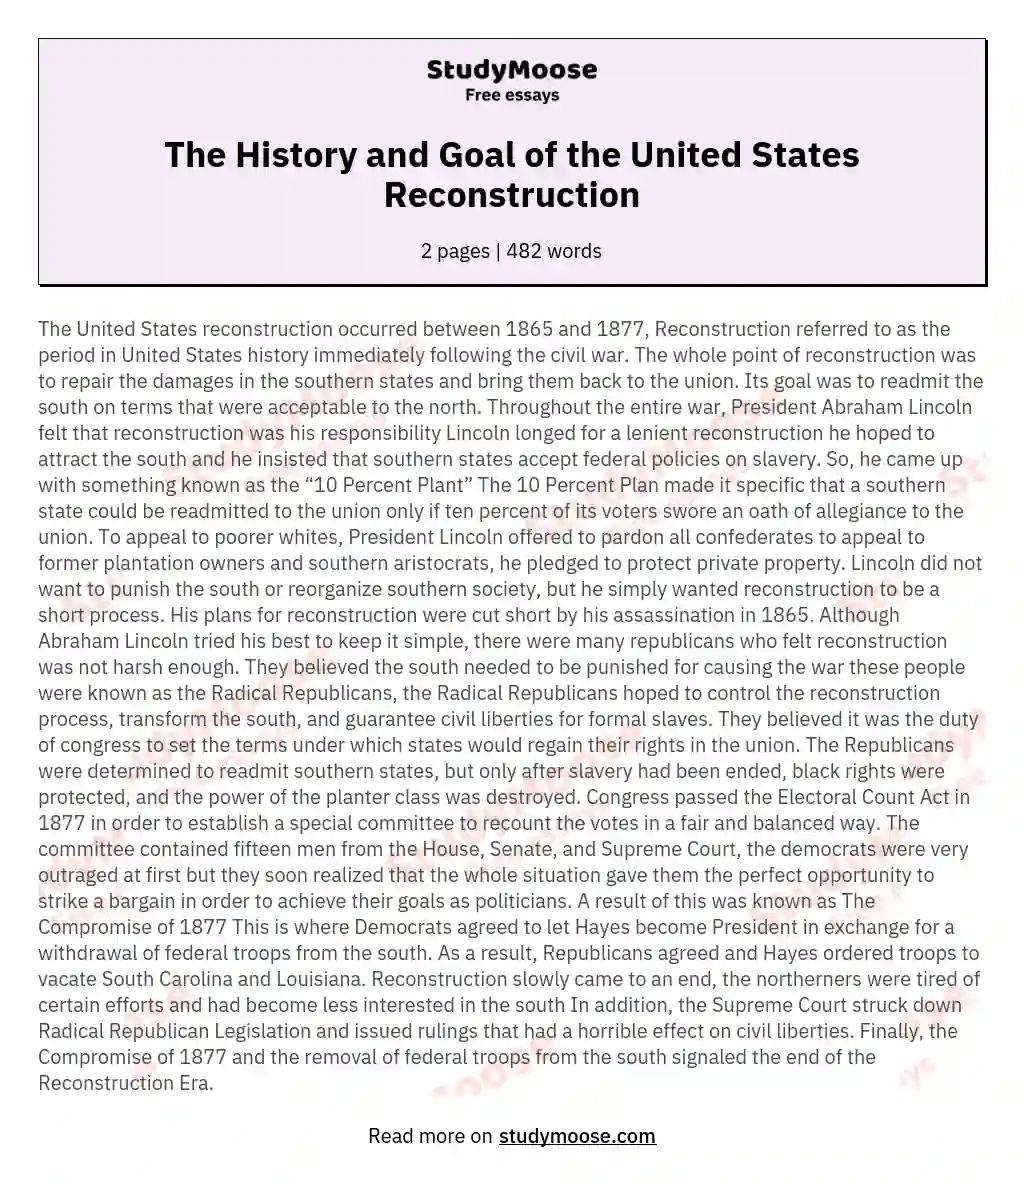 The History and Goal of the United States Reconstruction essay